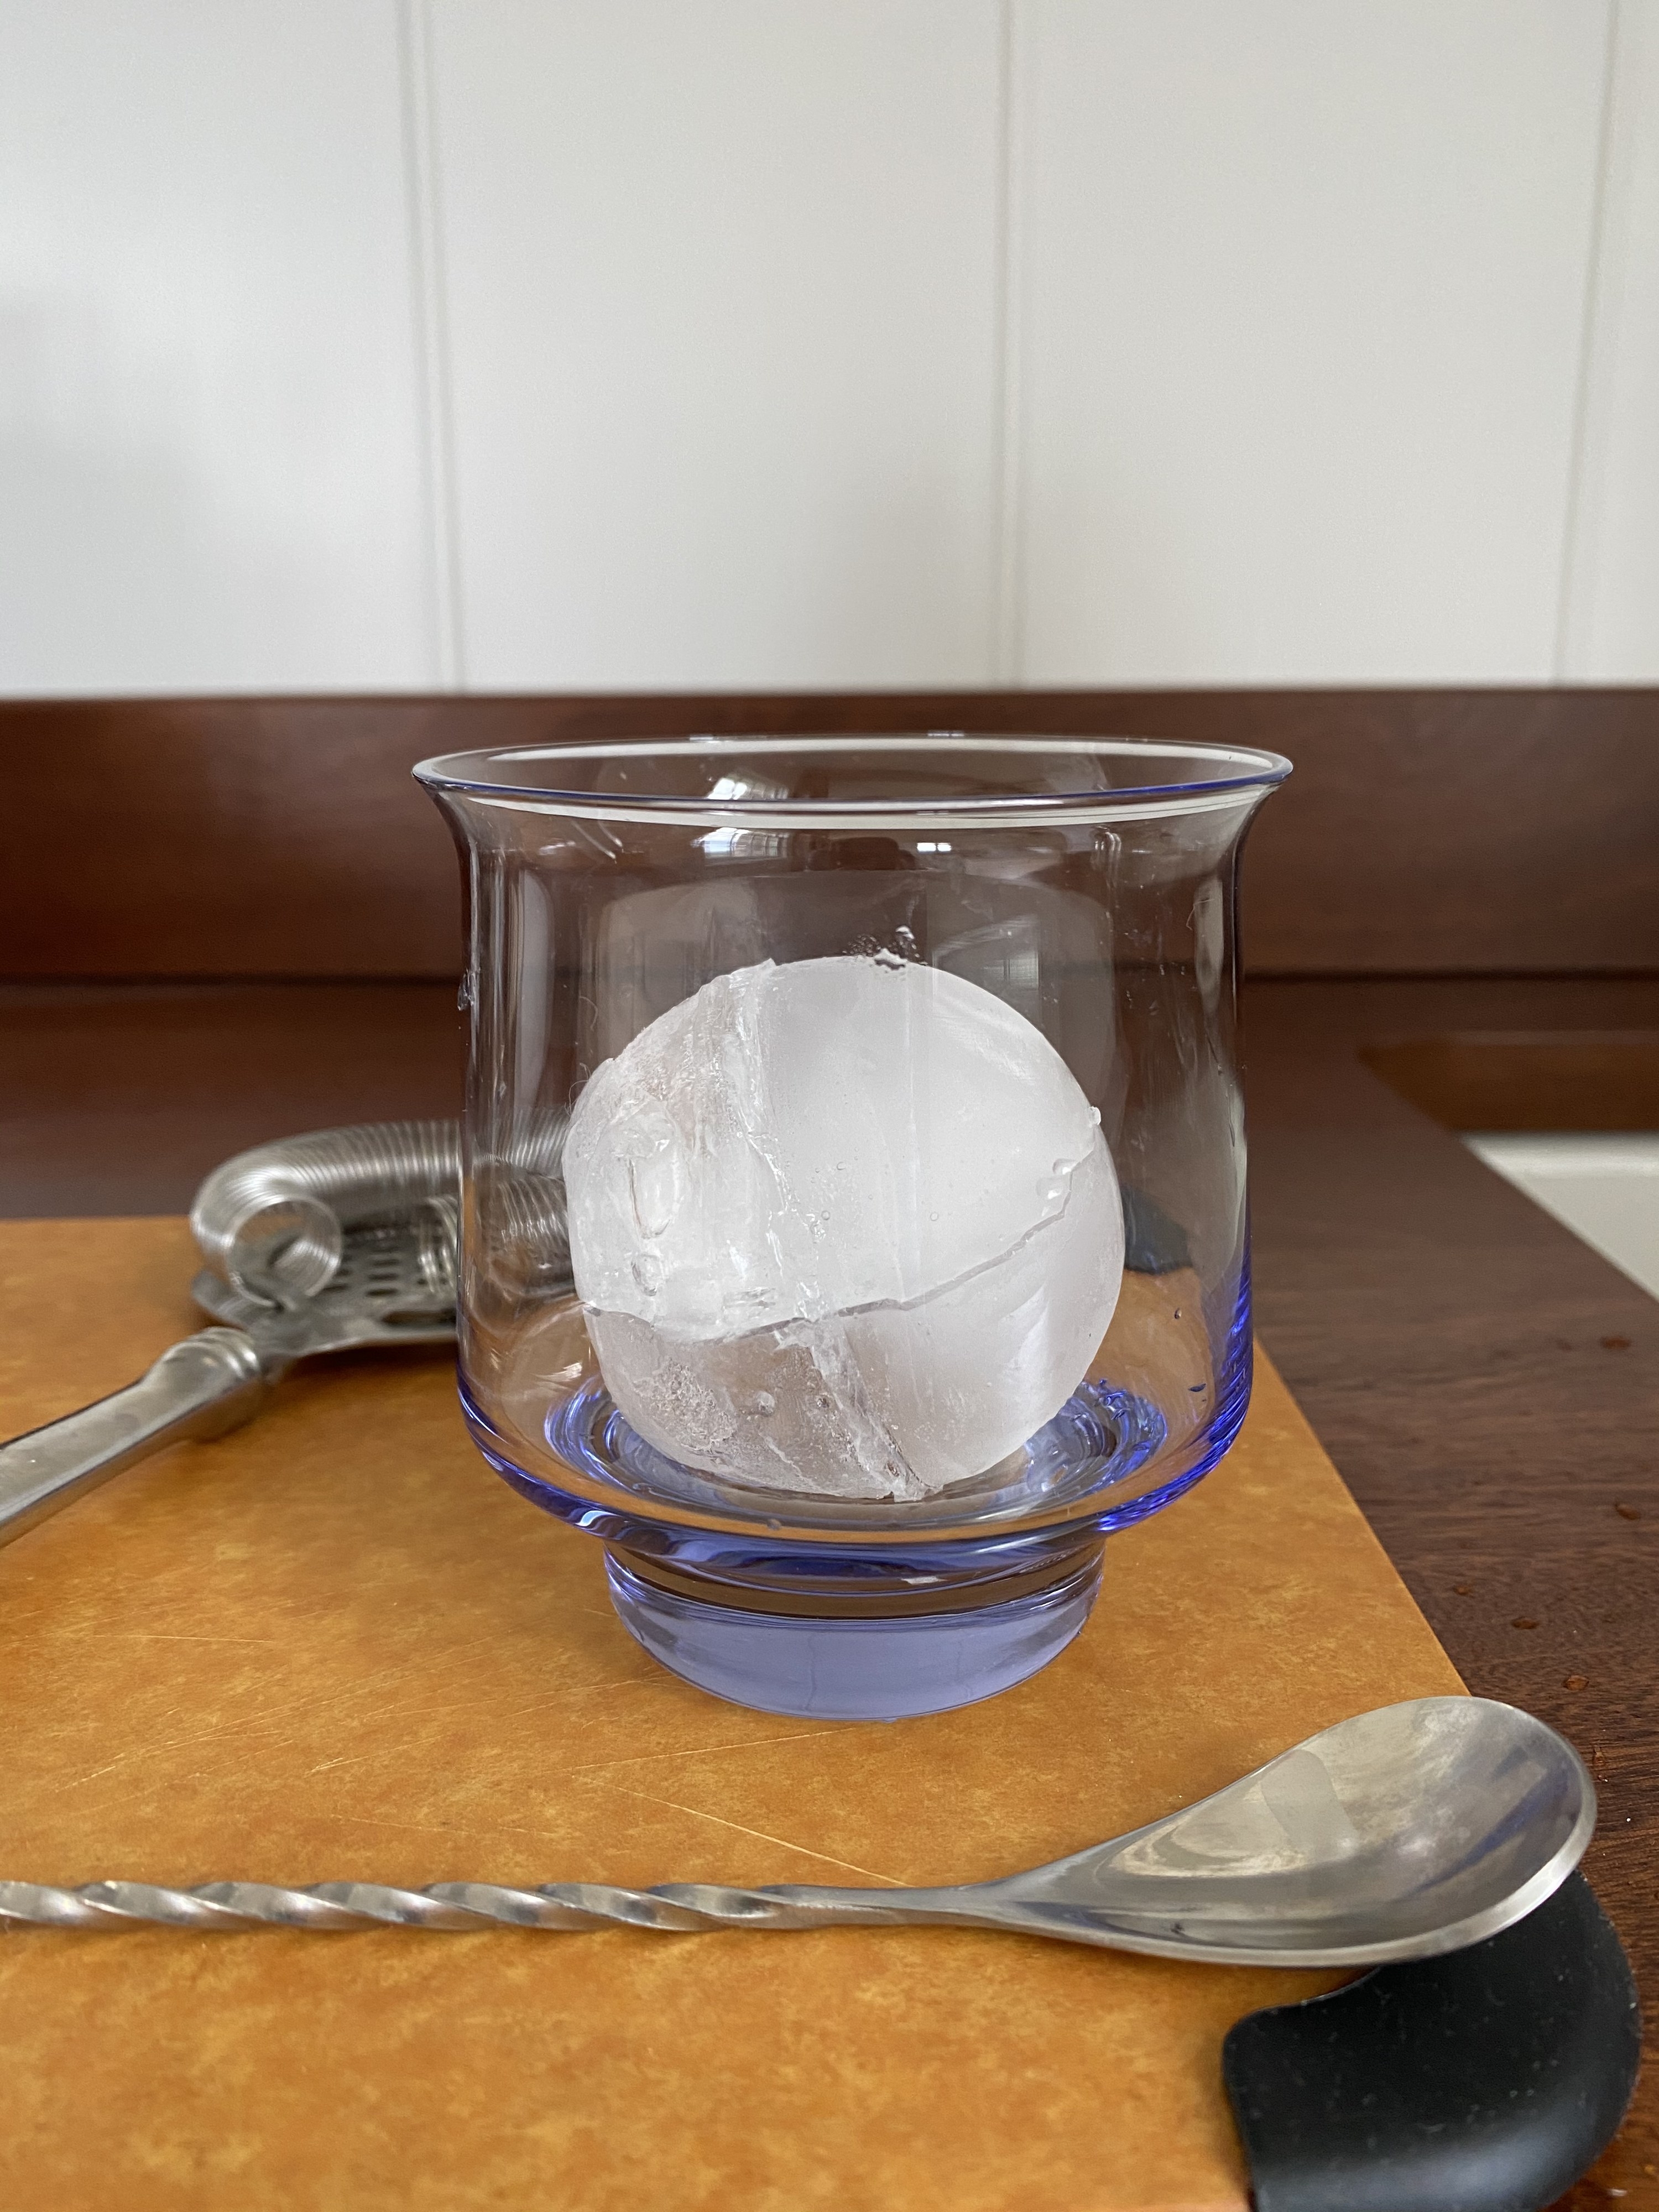 A jumbo spherical ice cube in a cocktail glass.